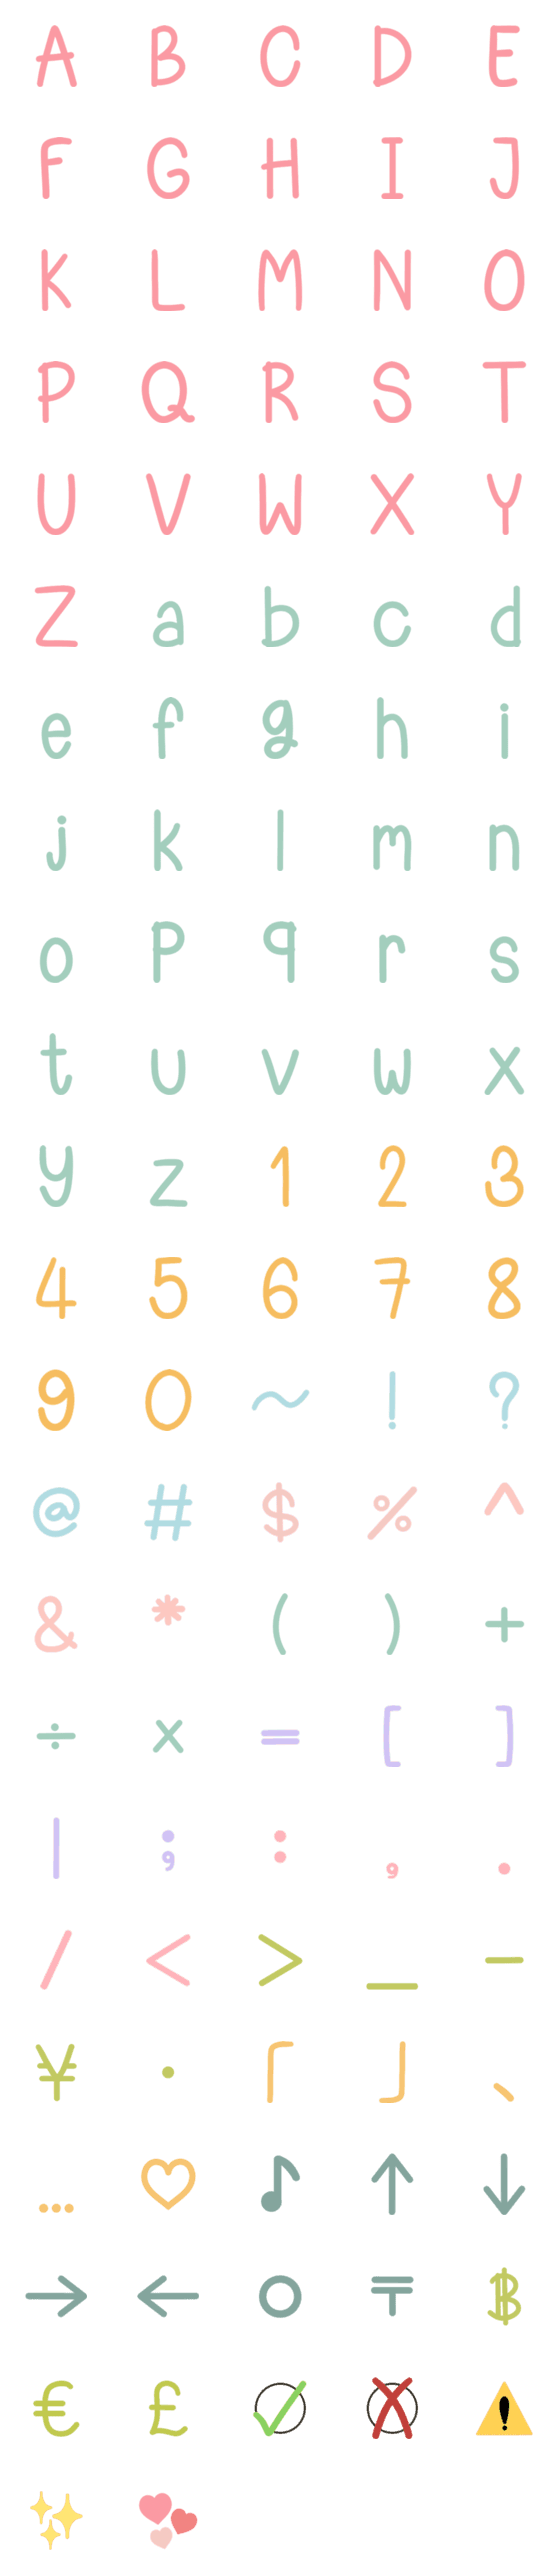 [LINE絵文字]ABC 0-9 font pastelの画像一覧